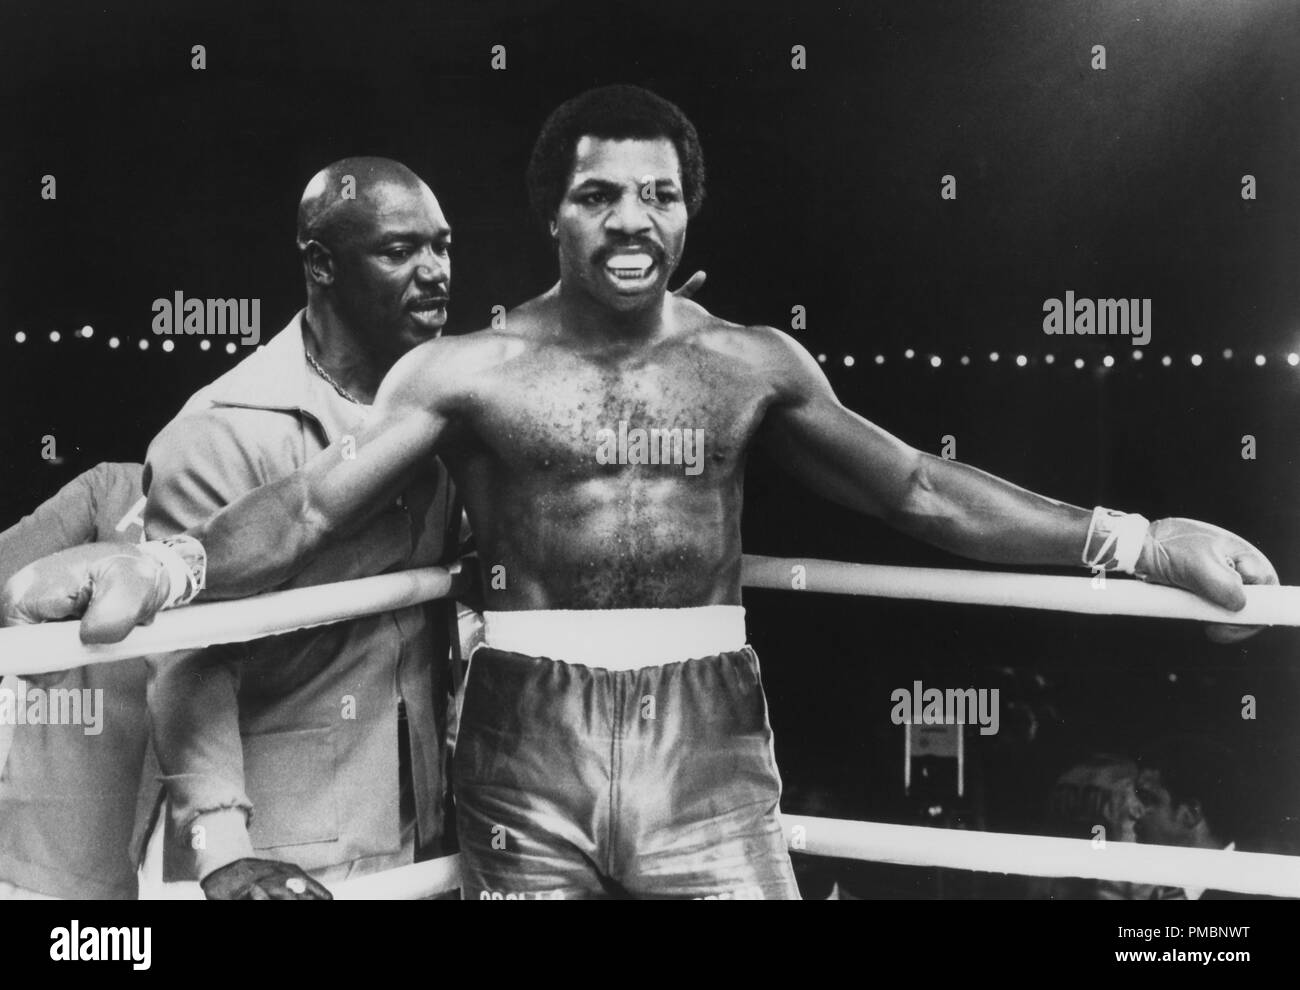 Apollo Creed High Resolution Stock Photography and Images - Alamy